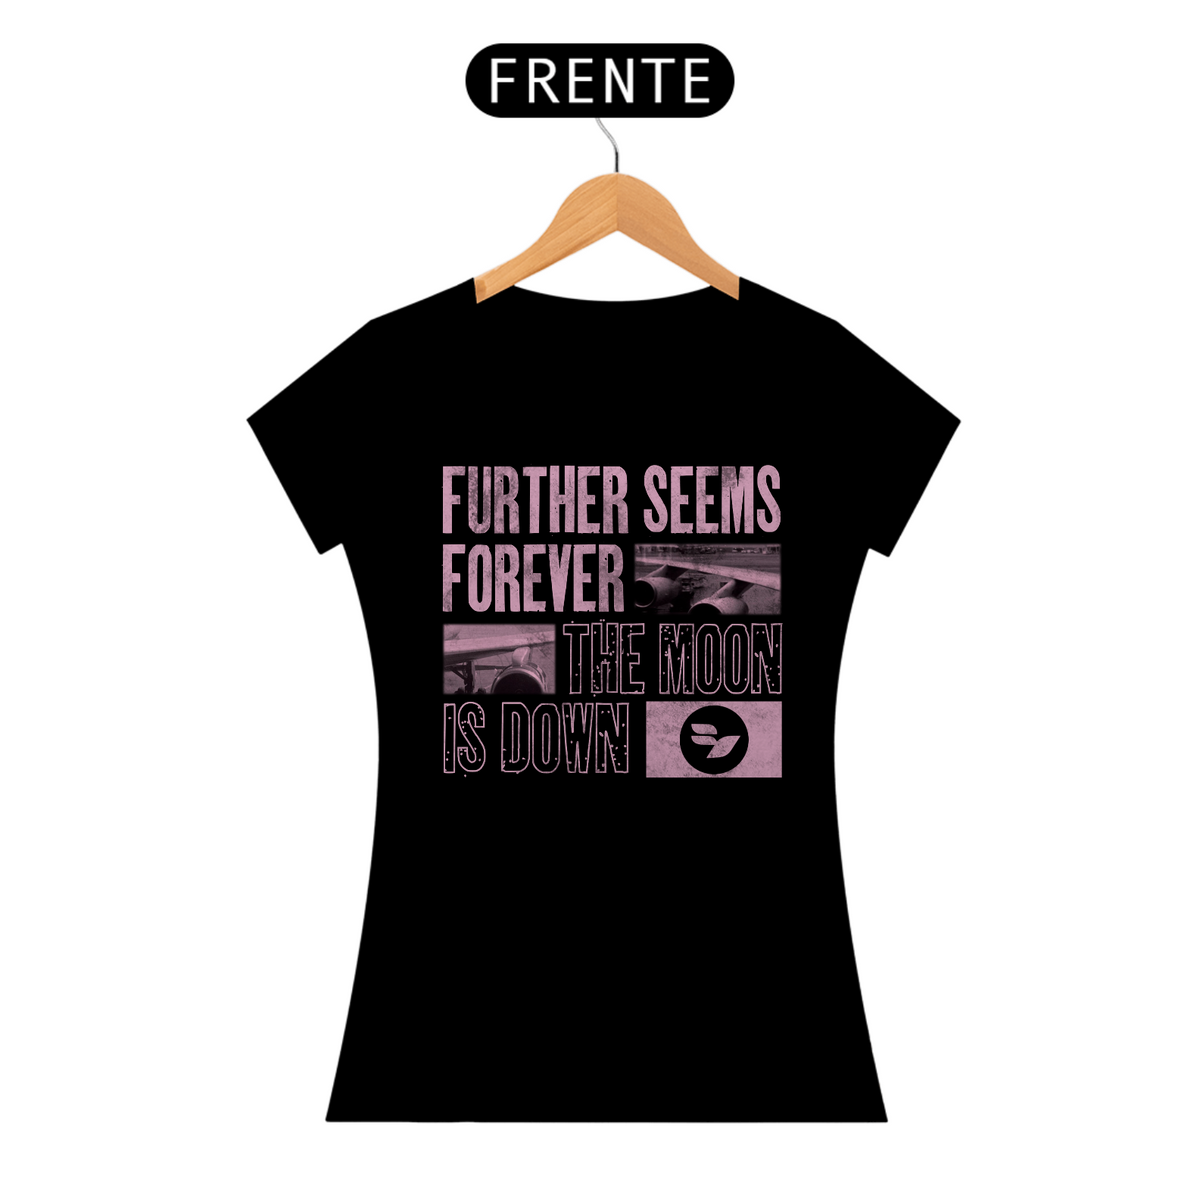 Nome do produto: Further Seems Forever - Baby Look